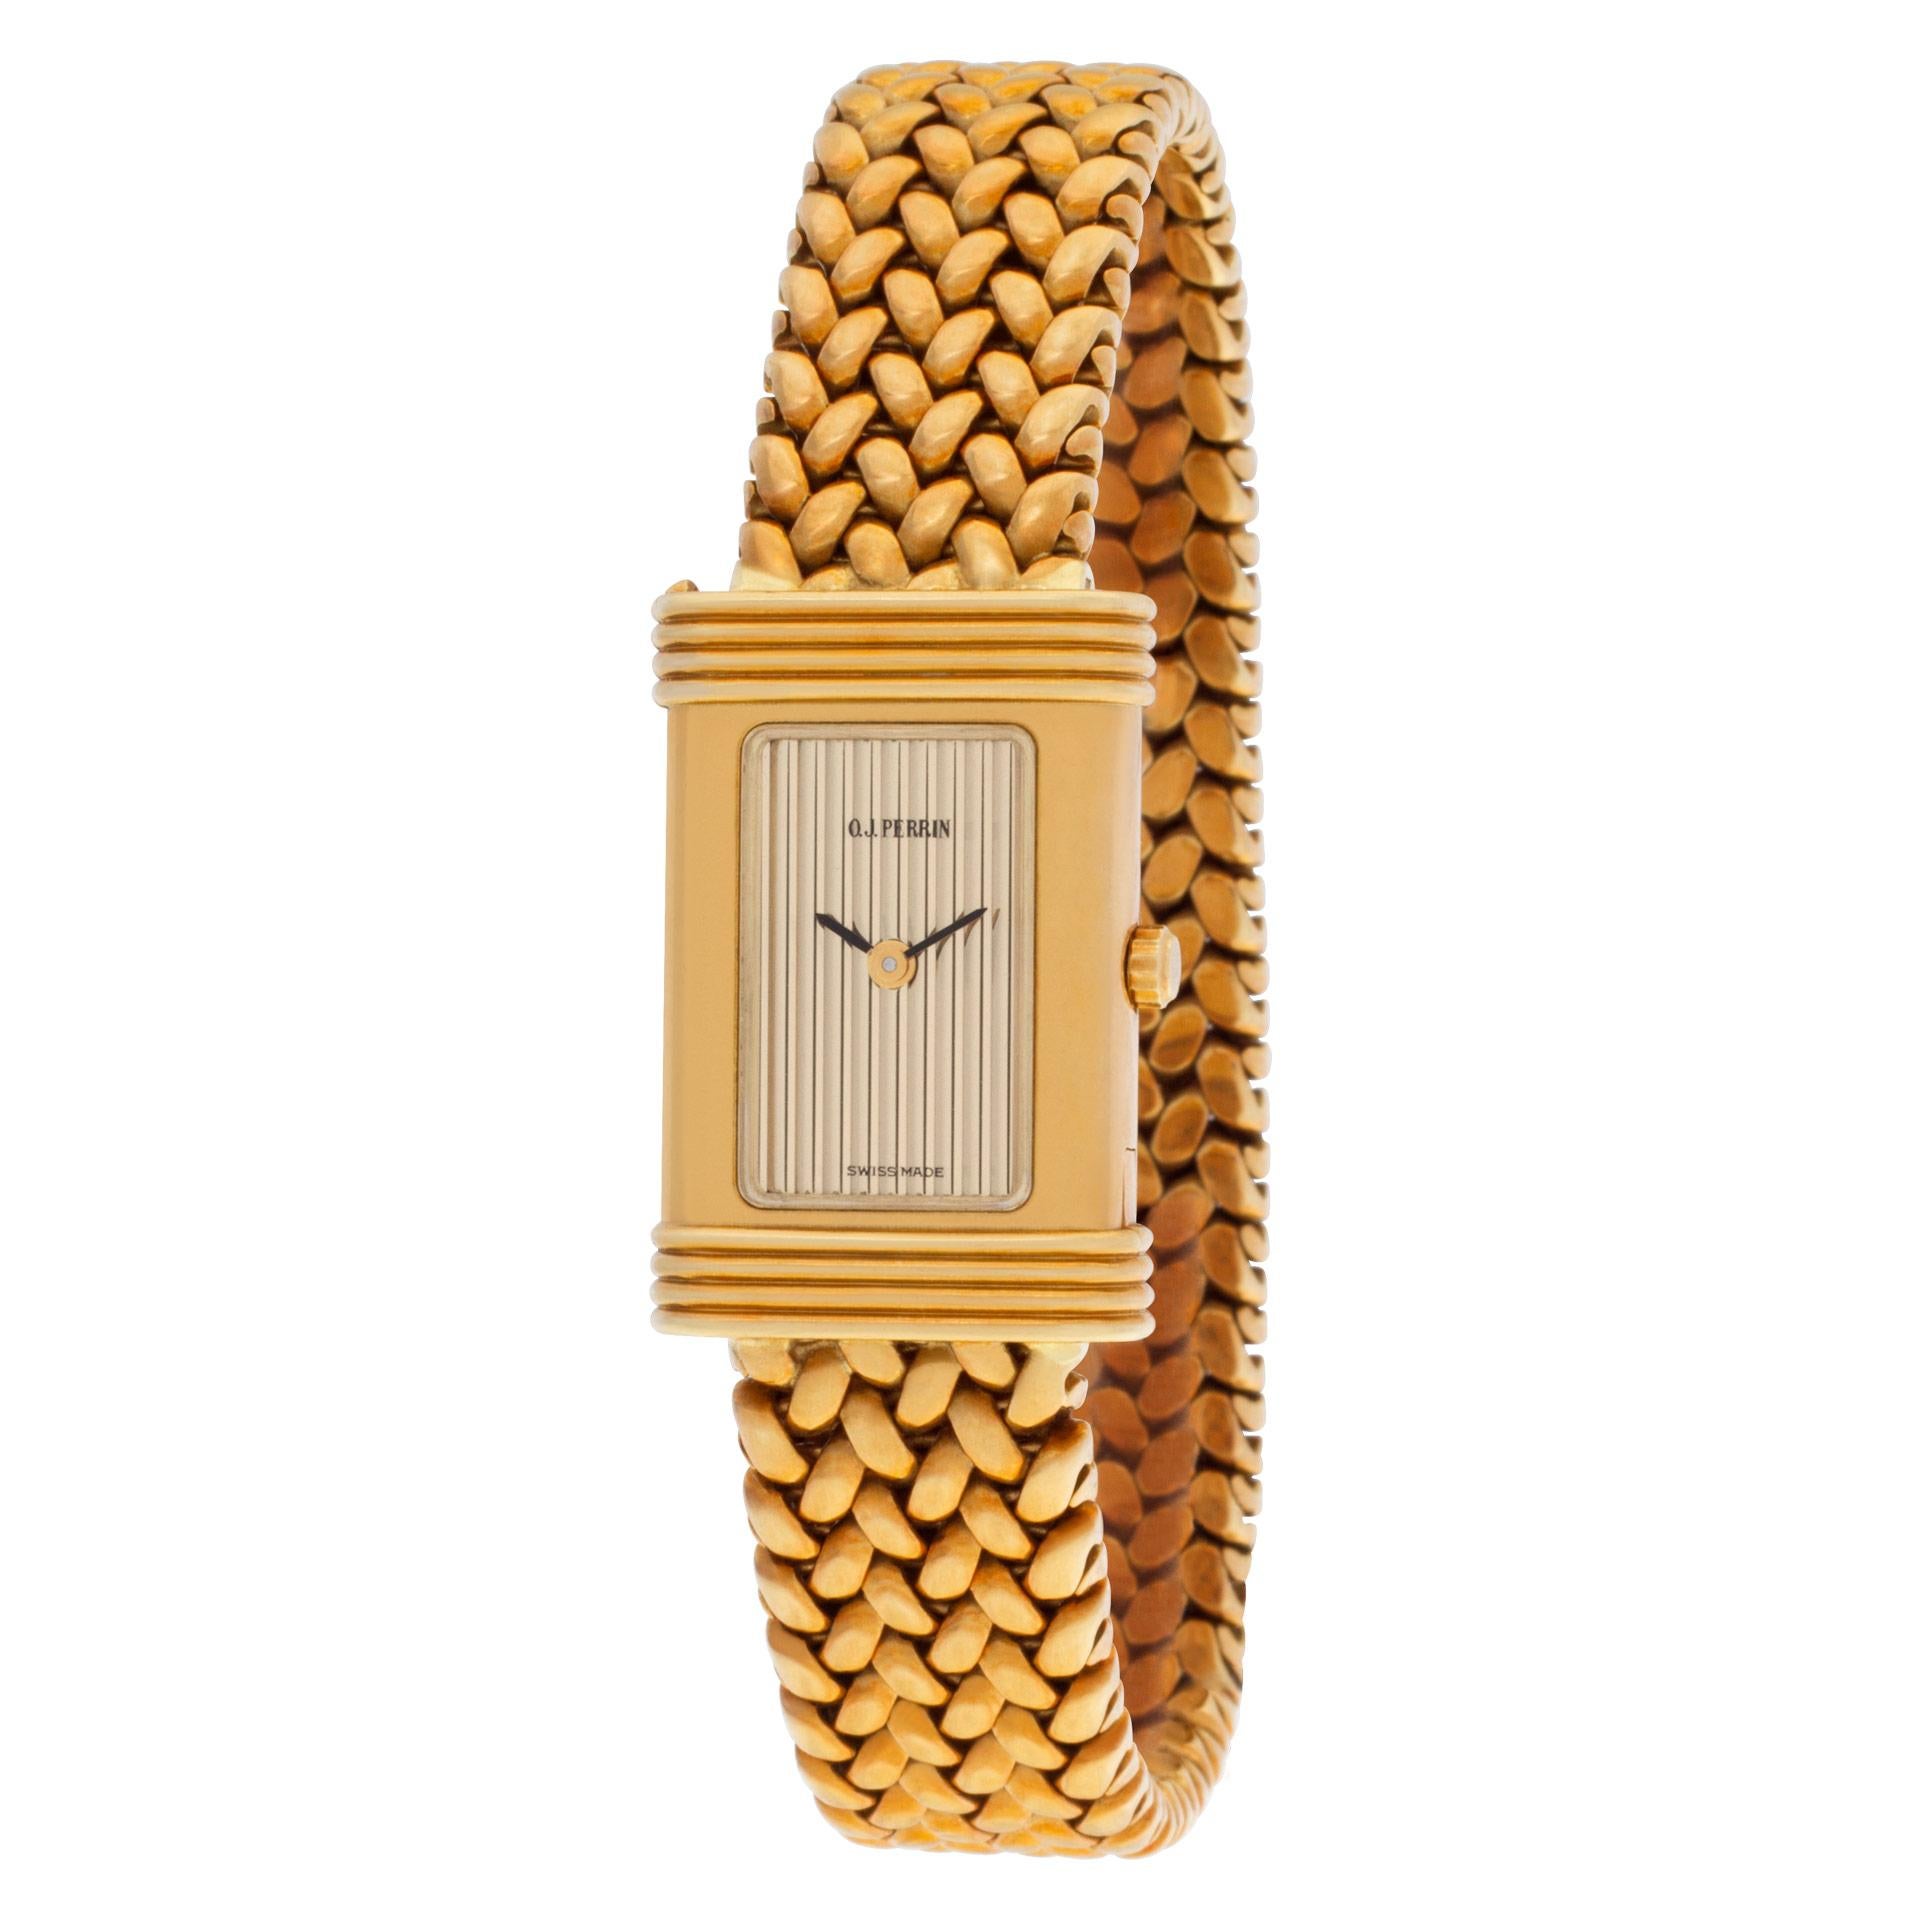 O.J Perrin Paris watch in 18k yellow gold. Features an easy strap changing system. Quartz. 17mmcase size. Ref 0104. Circa 1980s. Fine Pre-owned O.J Perrin Watch. Certified preowned Classic O.J Perrin Classic watch is made out of yellow gold on a 18k